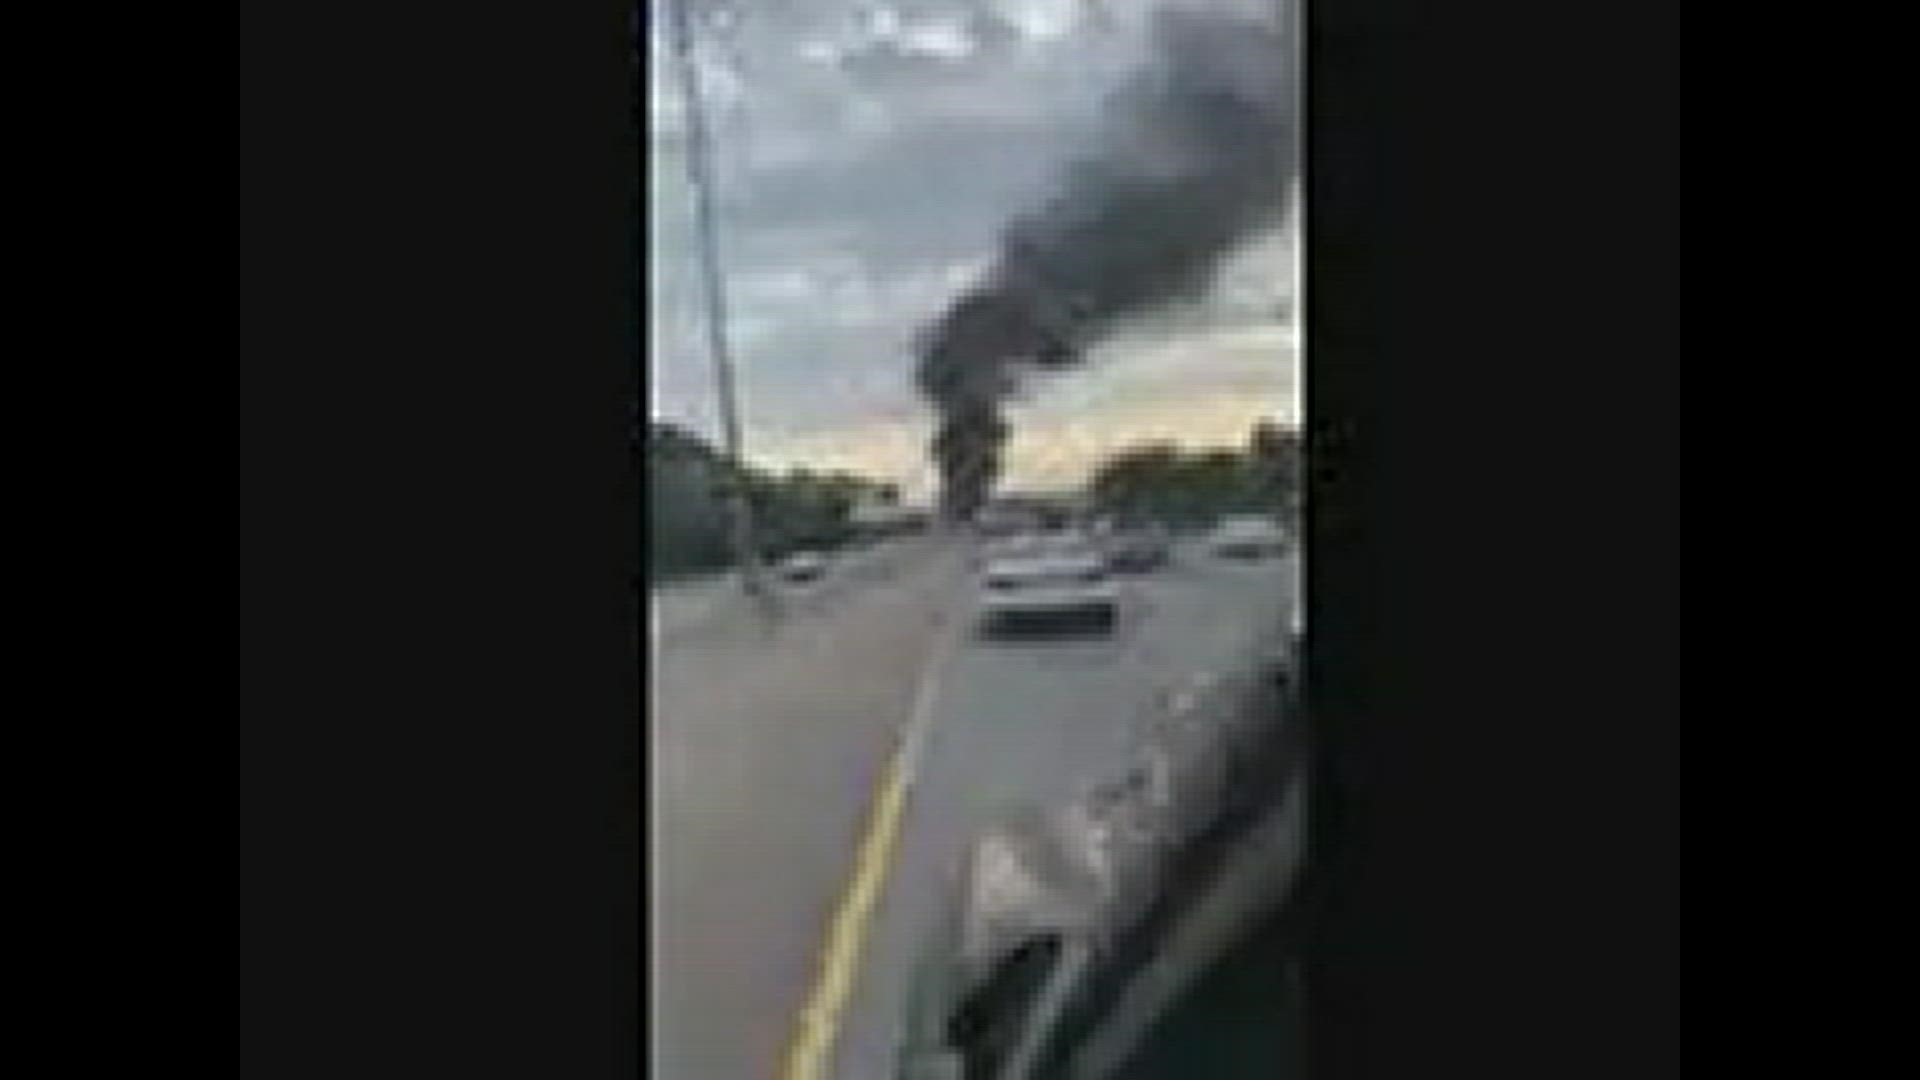 I am this on my way into work this was a fire that happened and if you watch it closer and explosions gonna happen. This was at I 10 westbound between Canal Boulevard and Saint Bernard highway if that's correct